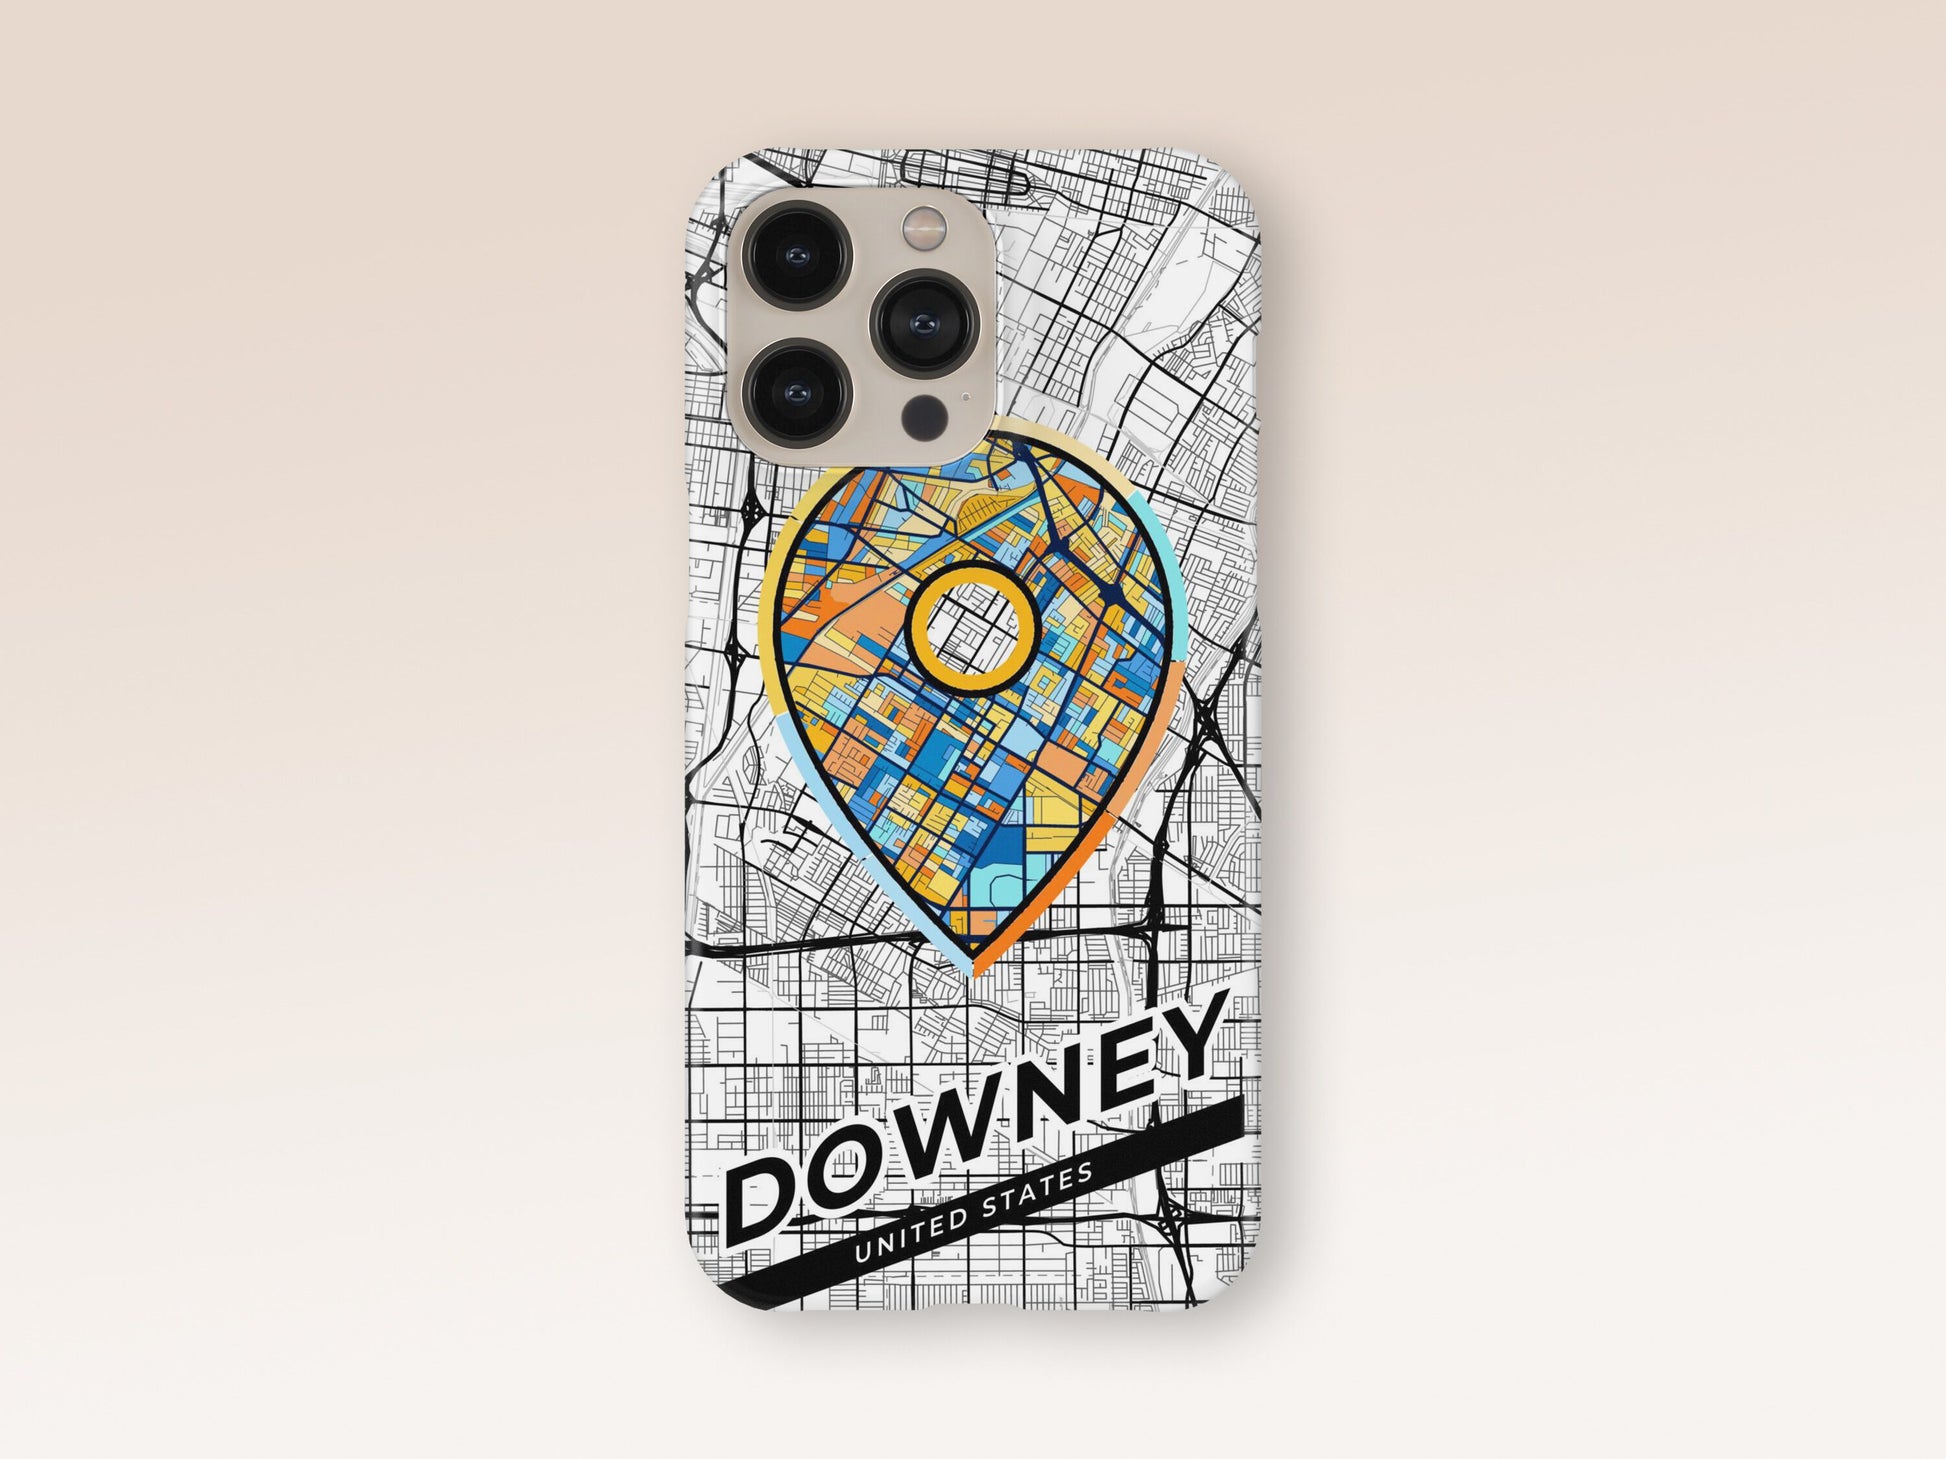 Downey California slim phone case with colorful icon. Birthday, wedding or housewarming gift. Couple match cases. 1